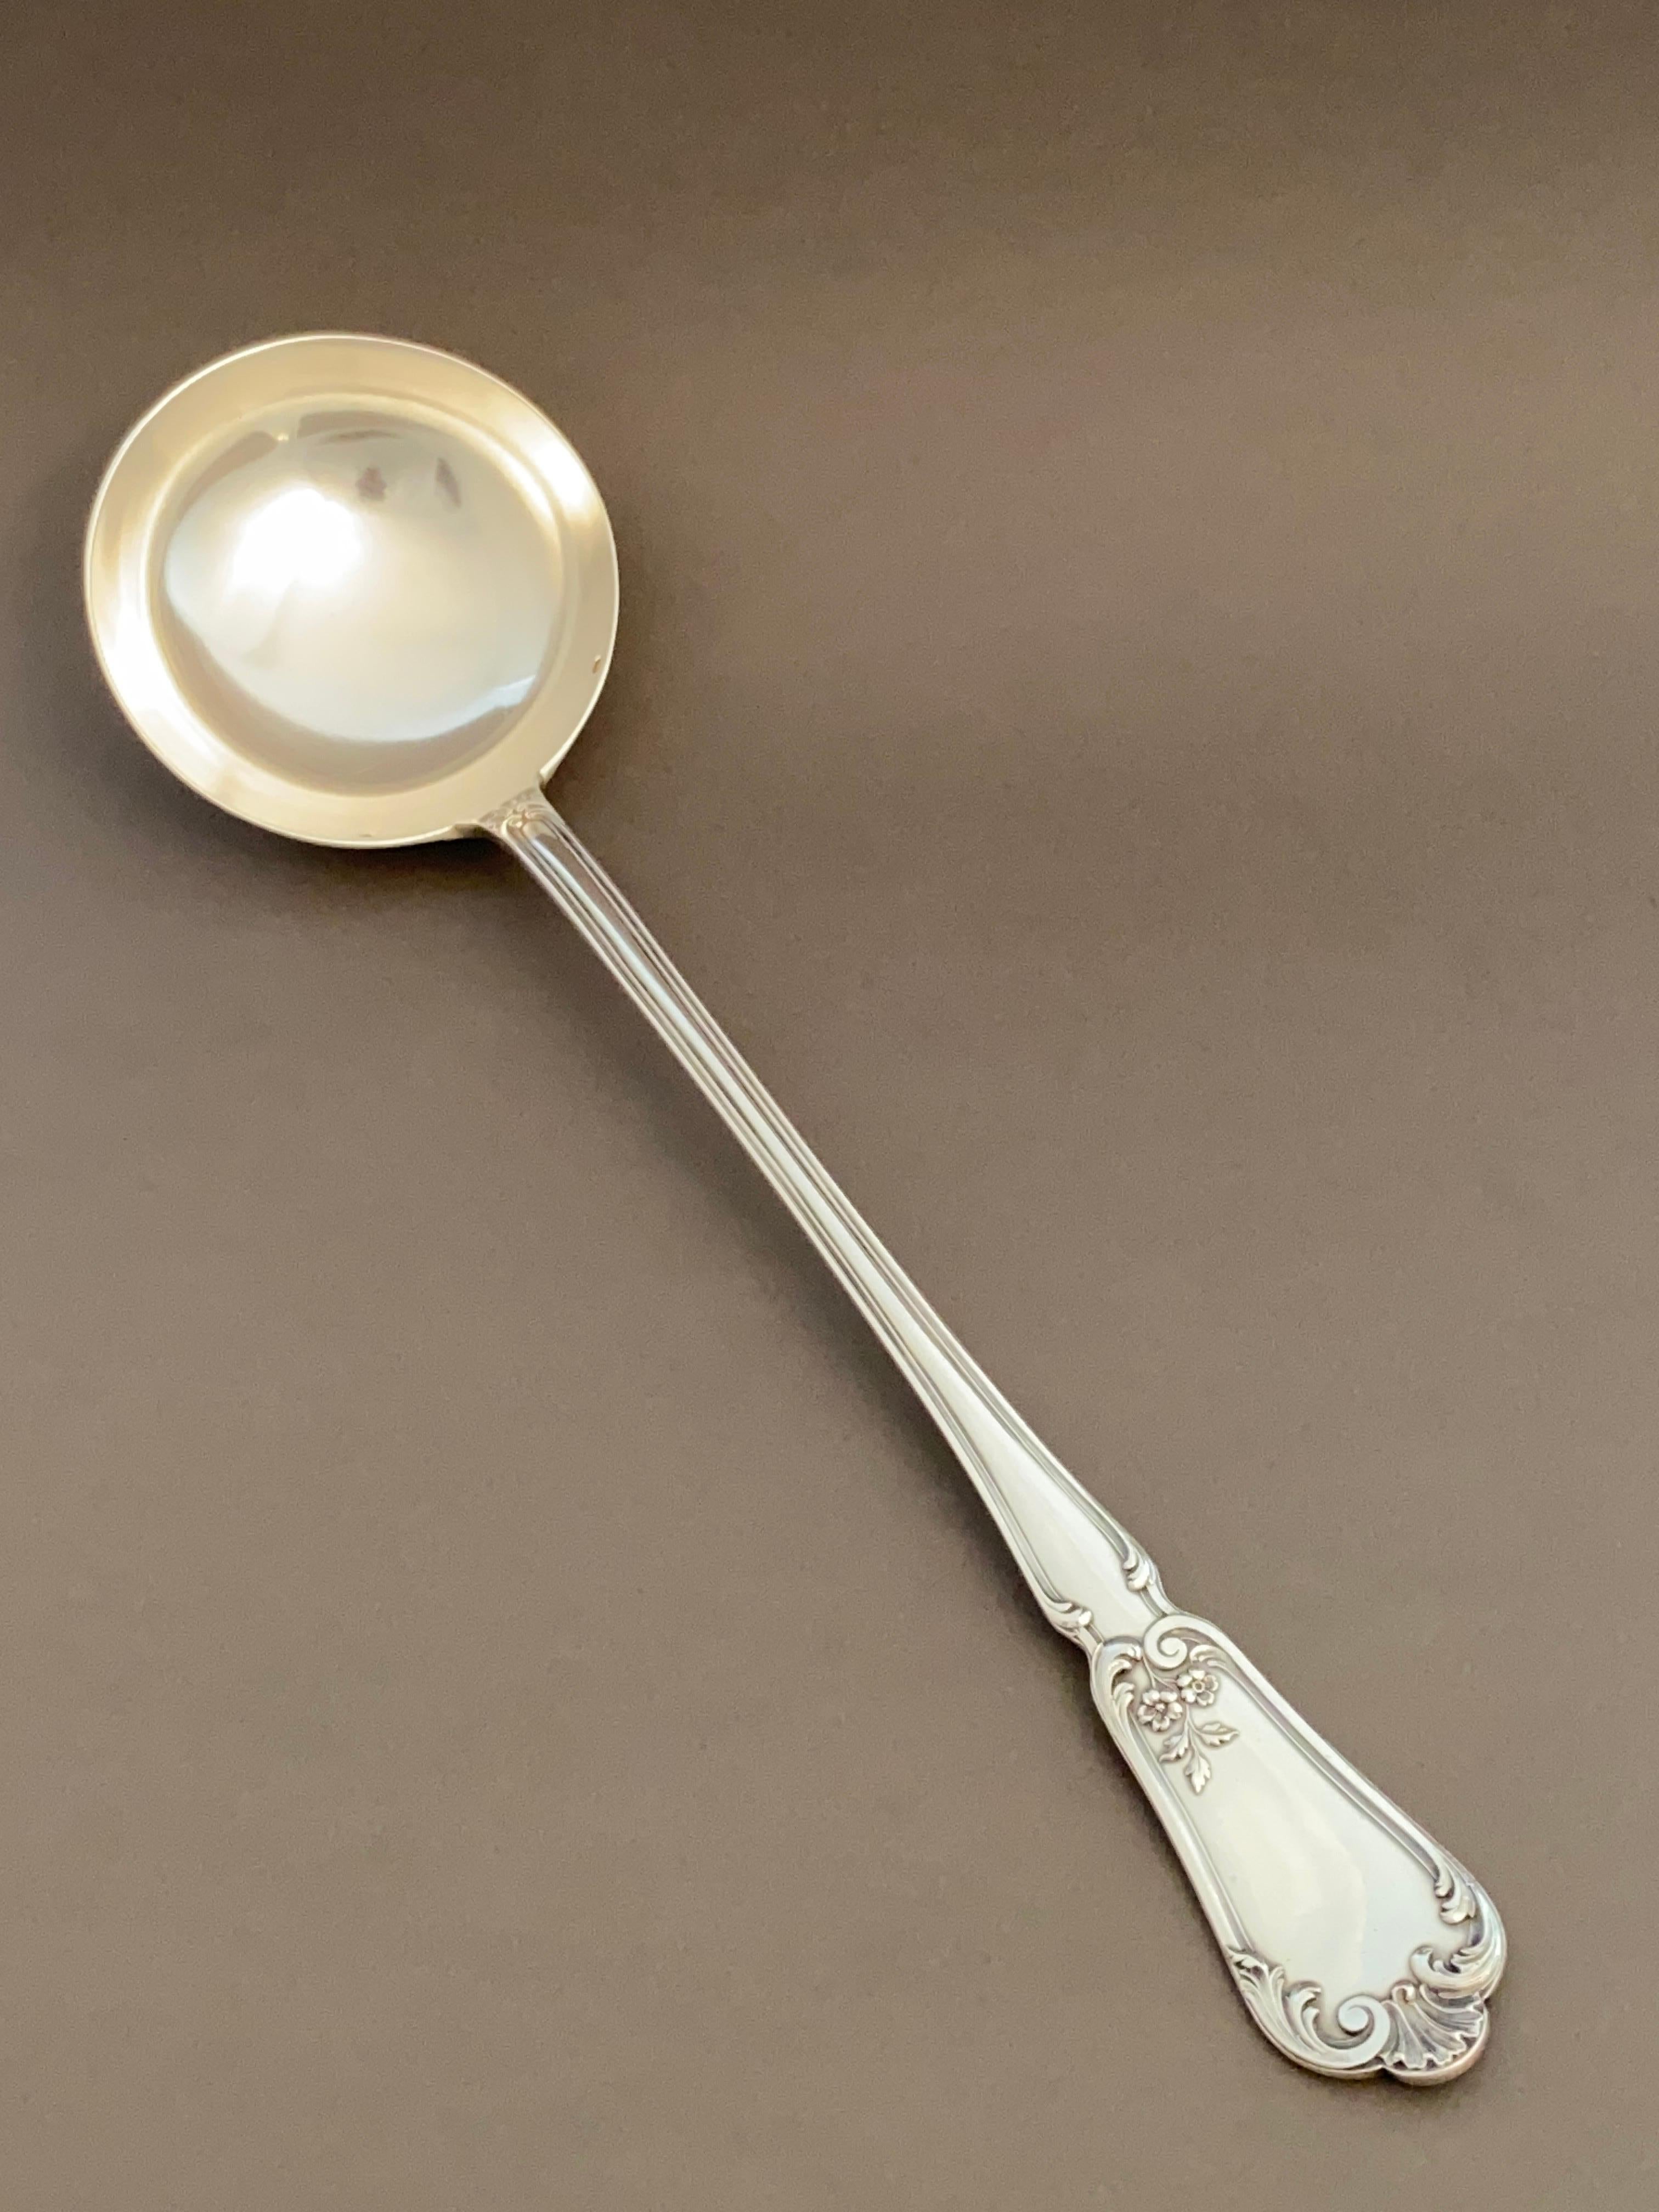 19th century Louis XV style solid silver ladle by French silversmith Henin & Cie. Finely chiseled with a shell, flowers and leaves.

Material: Silver 1st title 950°/°°
Hallmark: Minerve
Period: Late 19th century
Goldsmith: Henin & Cie
Weight: 240